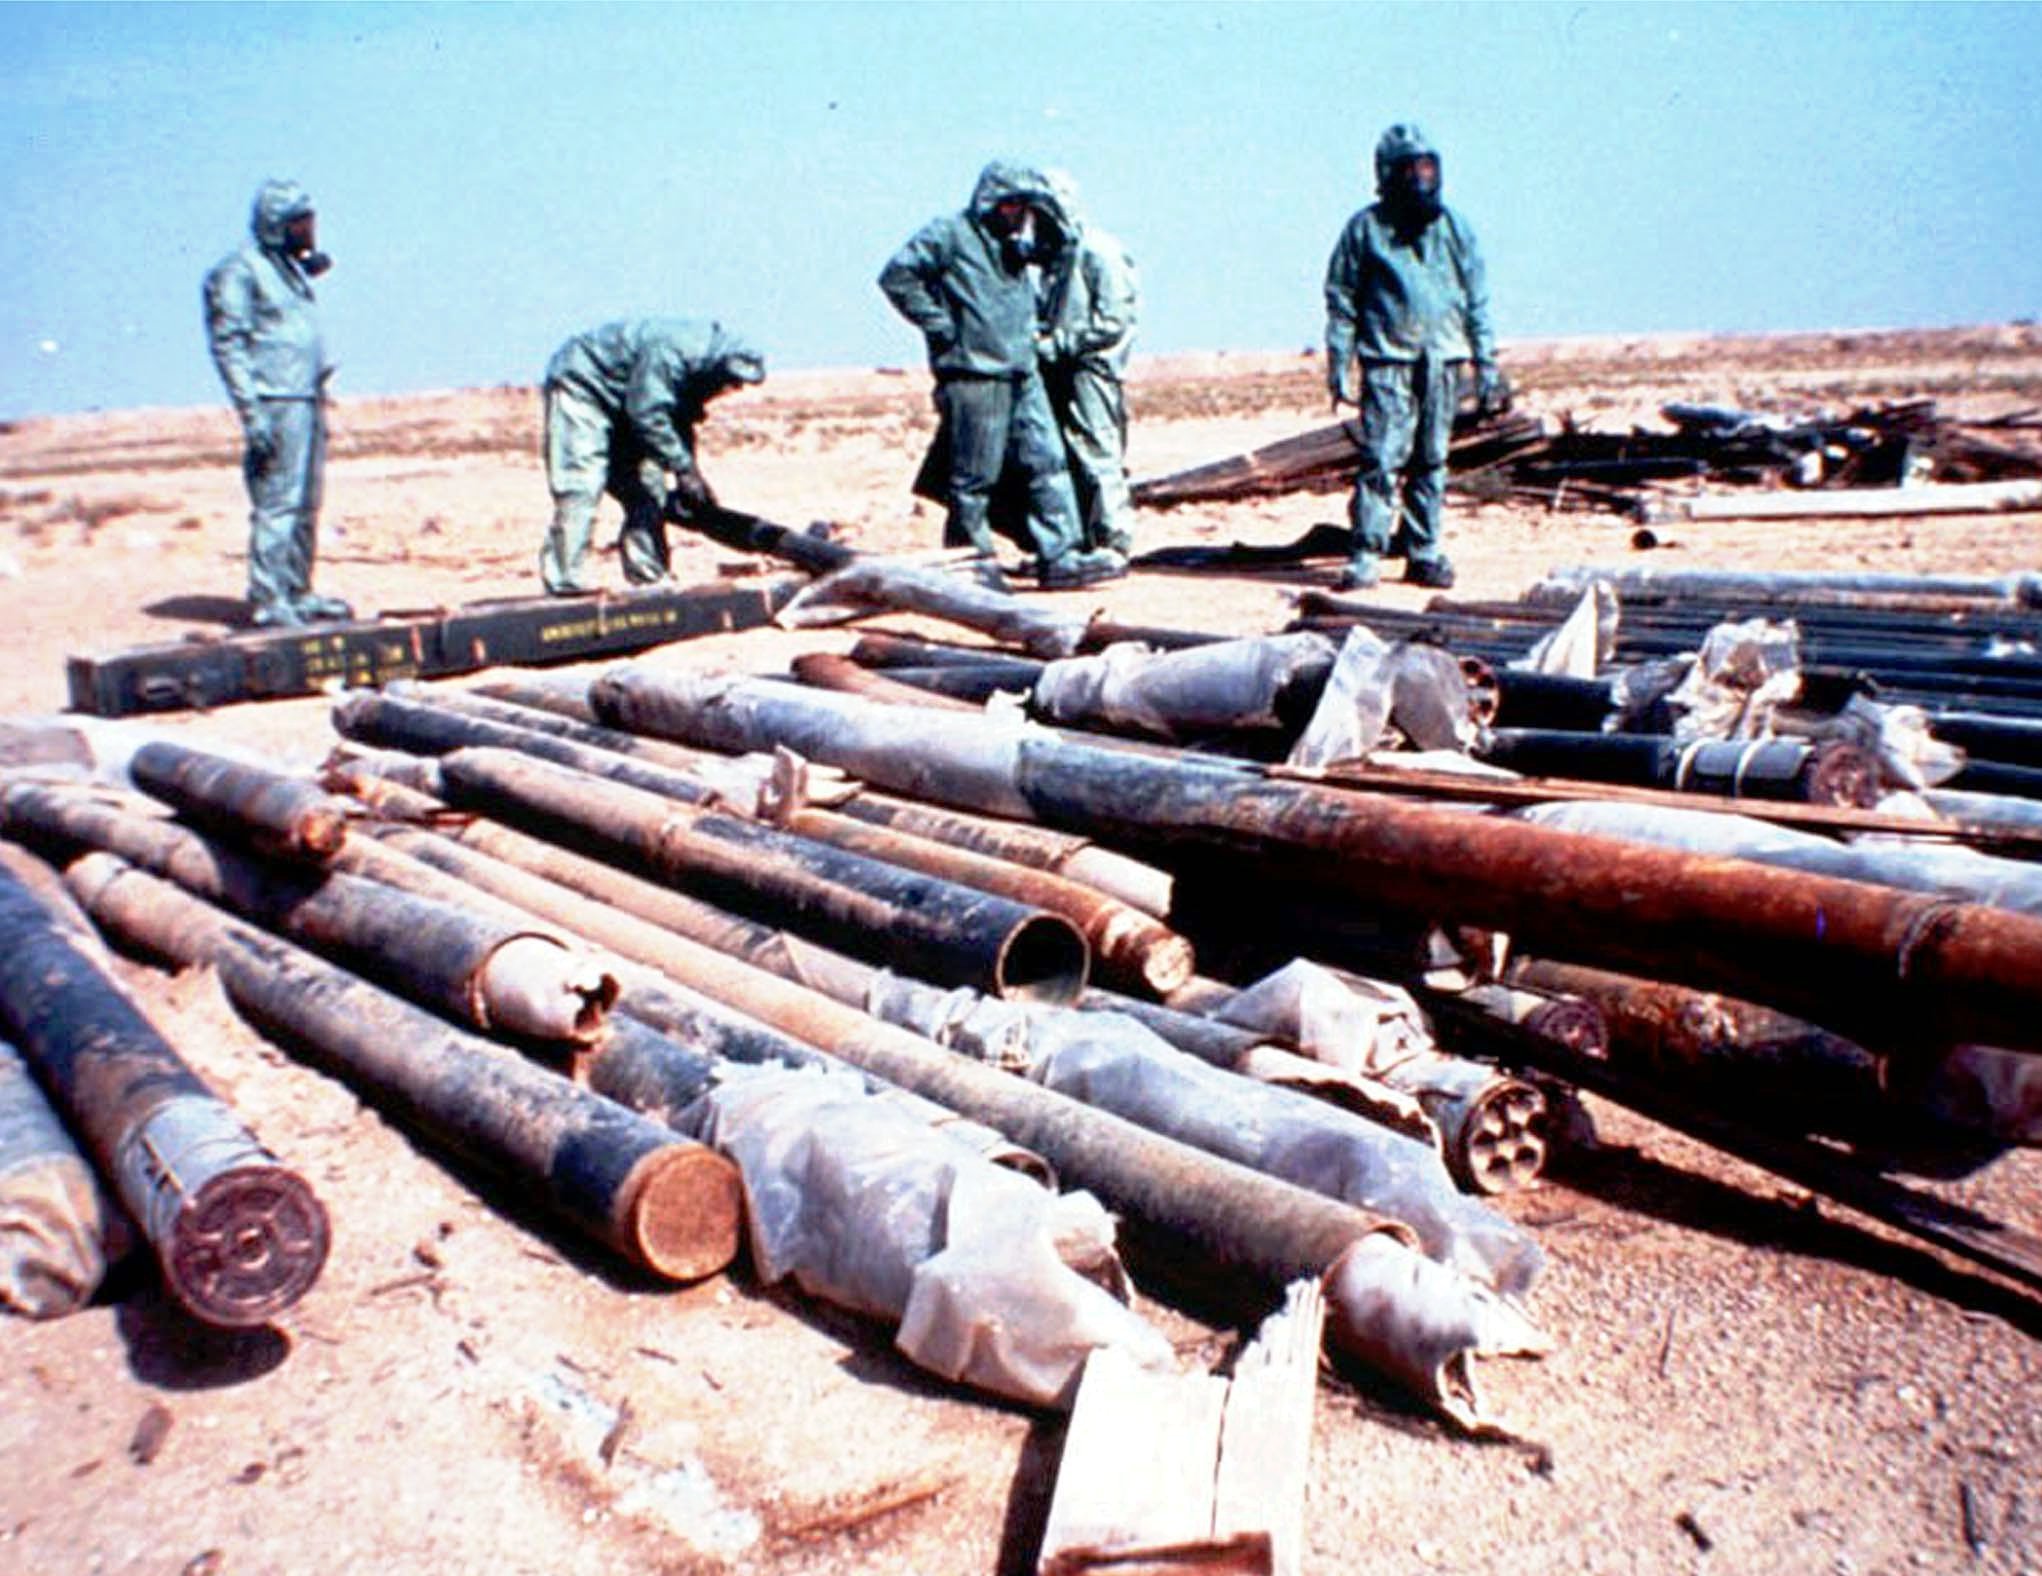 United Nations technicians ready Iraqi nerve agents weapons for elimination (Image: British Ministry of Defense)